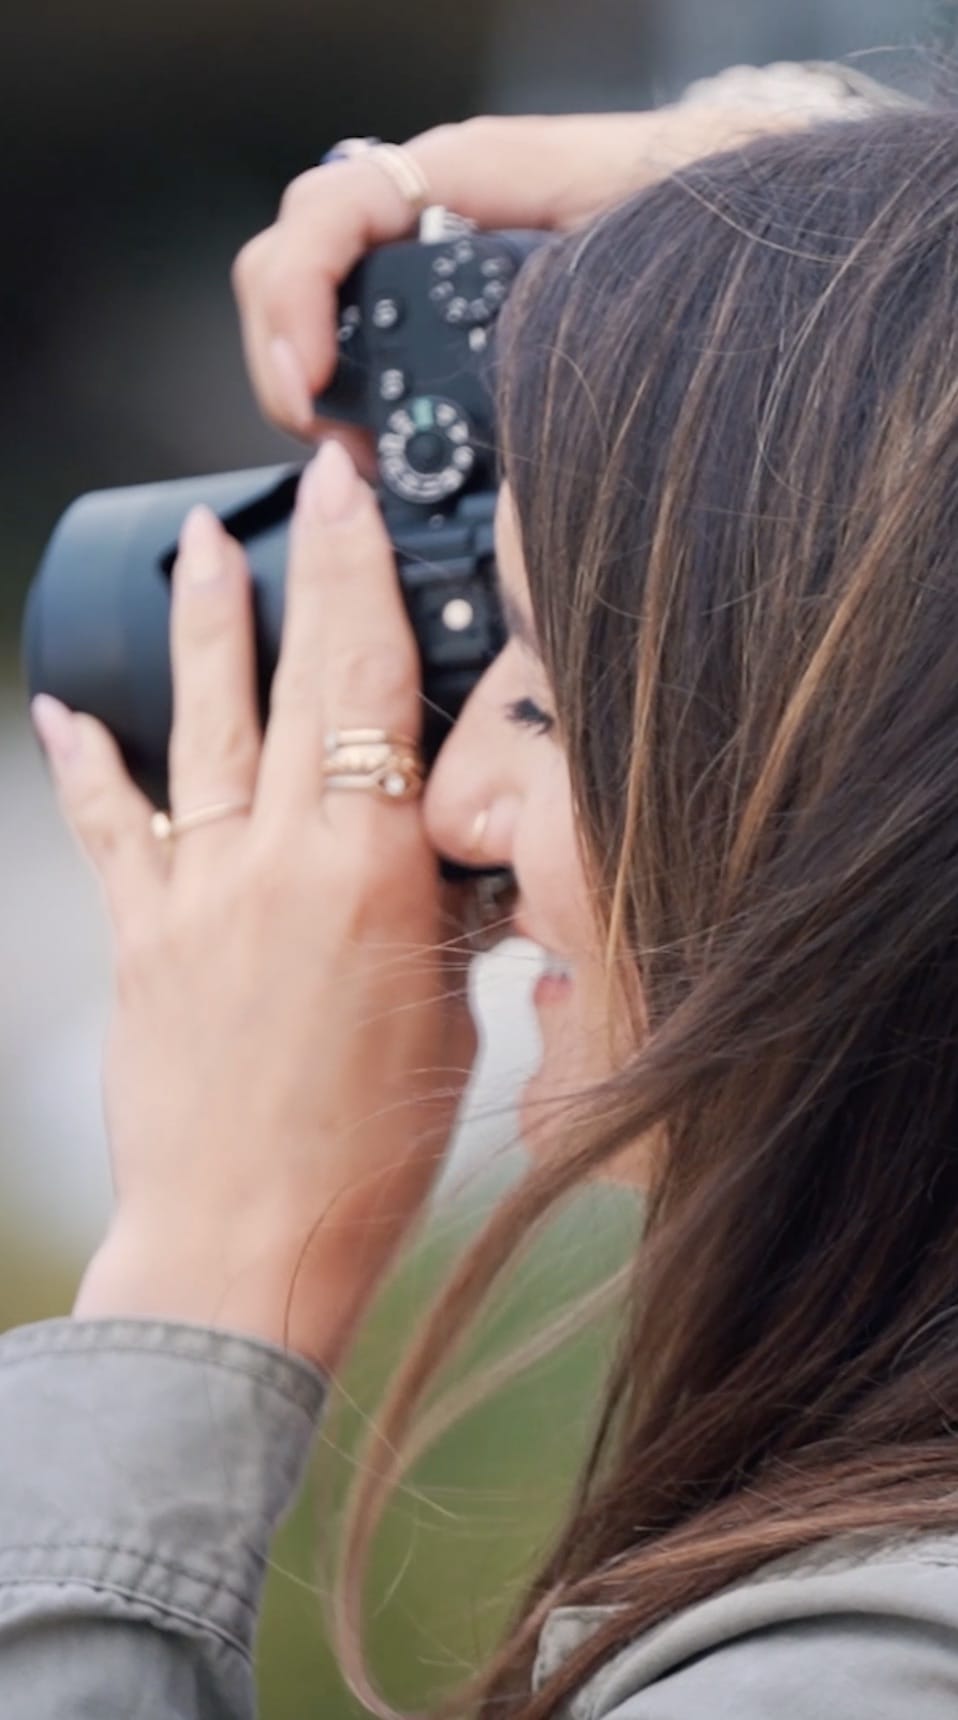 A close up image of Marcela Plosker, a Boston wedding photographer, taking a photo during a wedding.